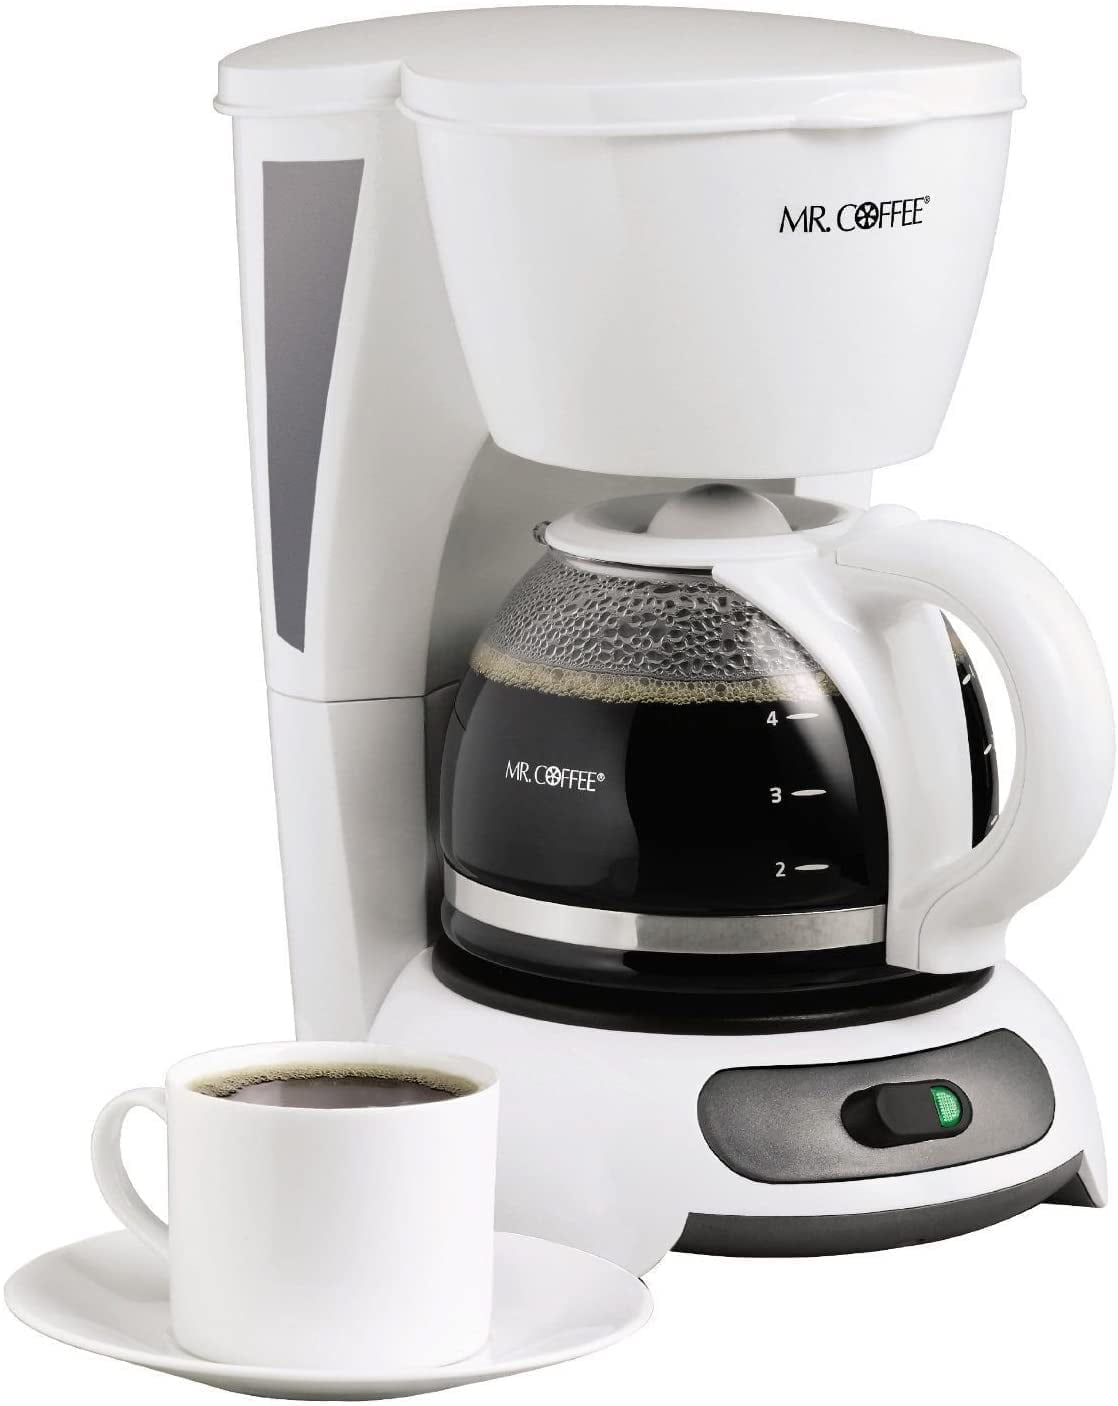 Mr. Coffee 4-Cup Coffee Maker Automatic Shut-Off Pause 'n Serve Feature,  White – The Market Depot